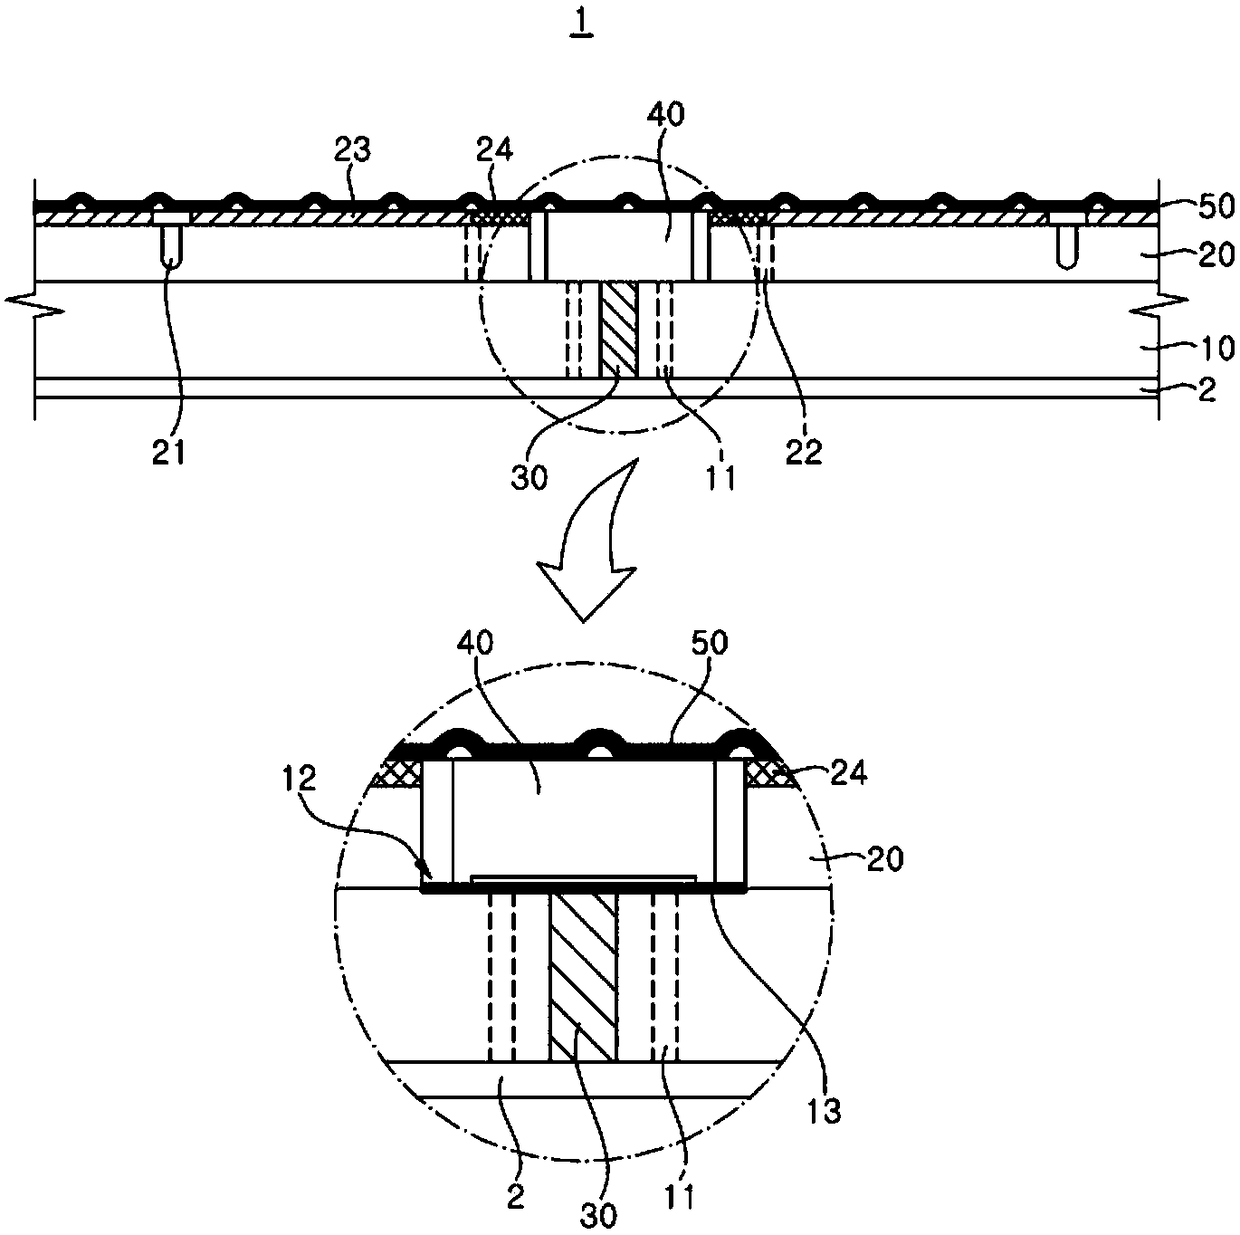 Automatic welding system for corrugated membrane sheet of membrane type liquefied-gas cargo hold, structure for guiding and fixing automatic welding apparatus for corrugated membrane sheet of membrane type liquefied-gas cargo hold, and structure for guiding automatic welding apparatus for corrugated membrane sheet of membrane type liquefied-gas cargo hold